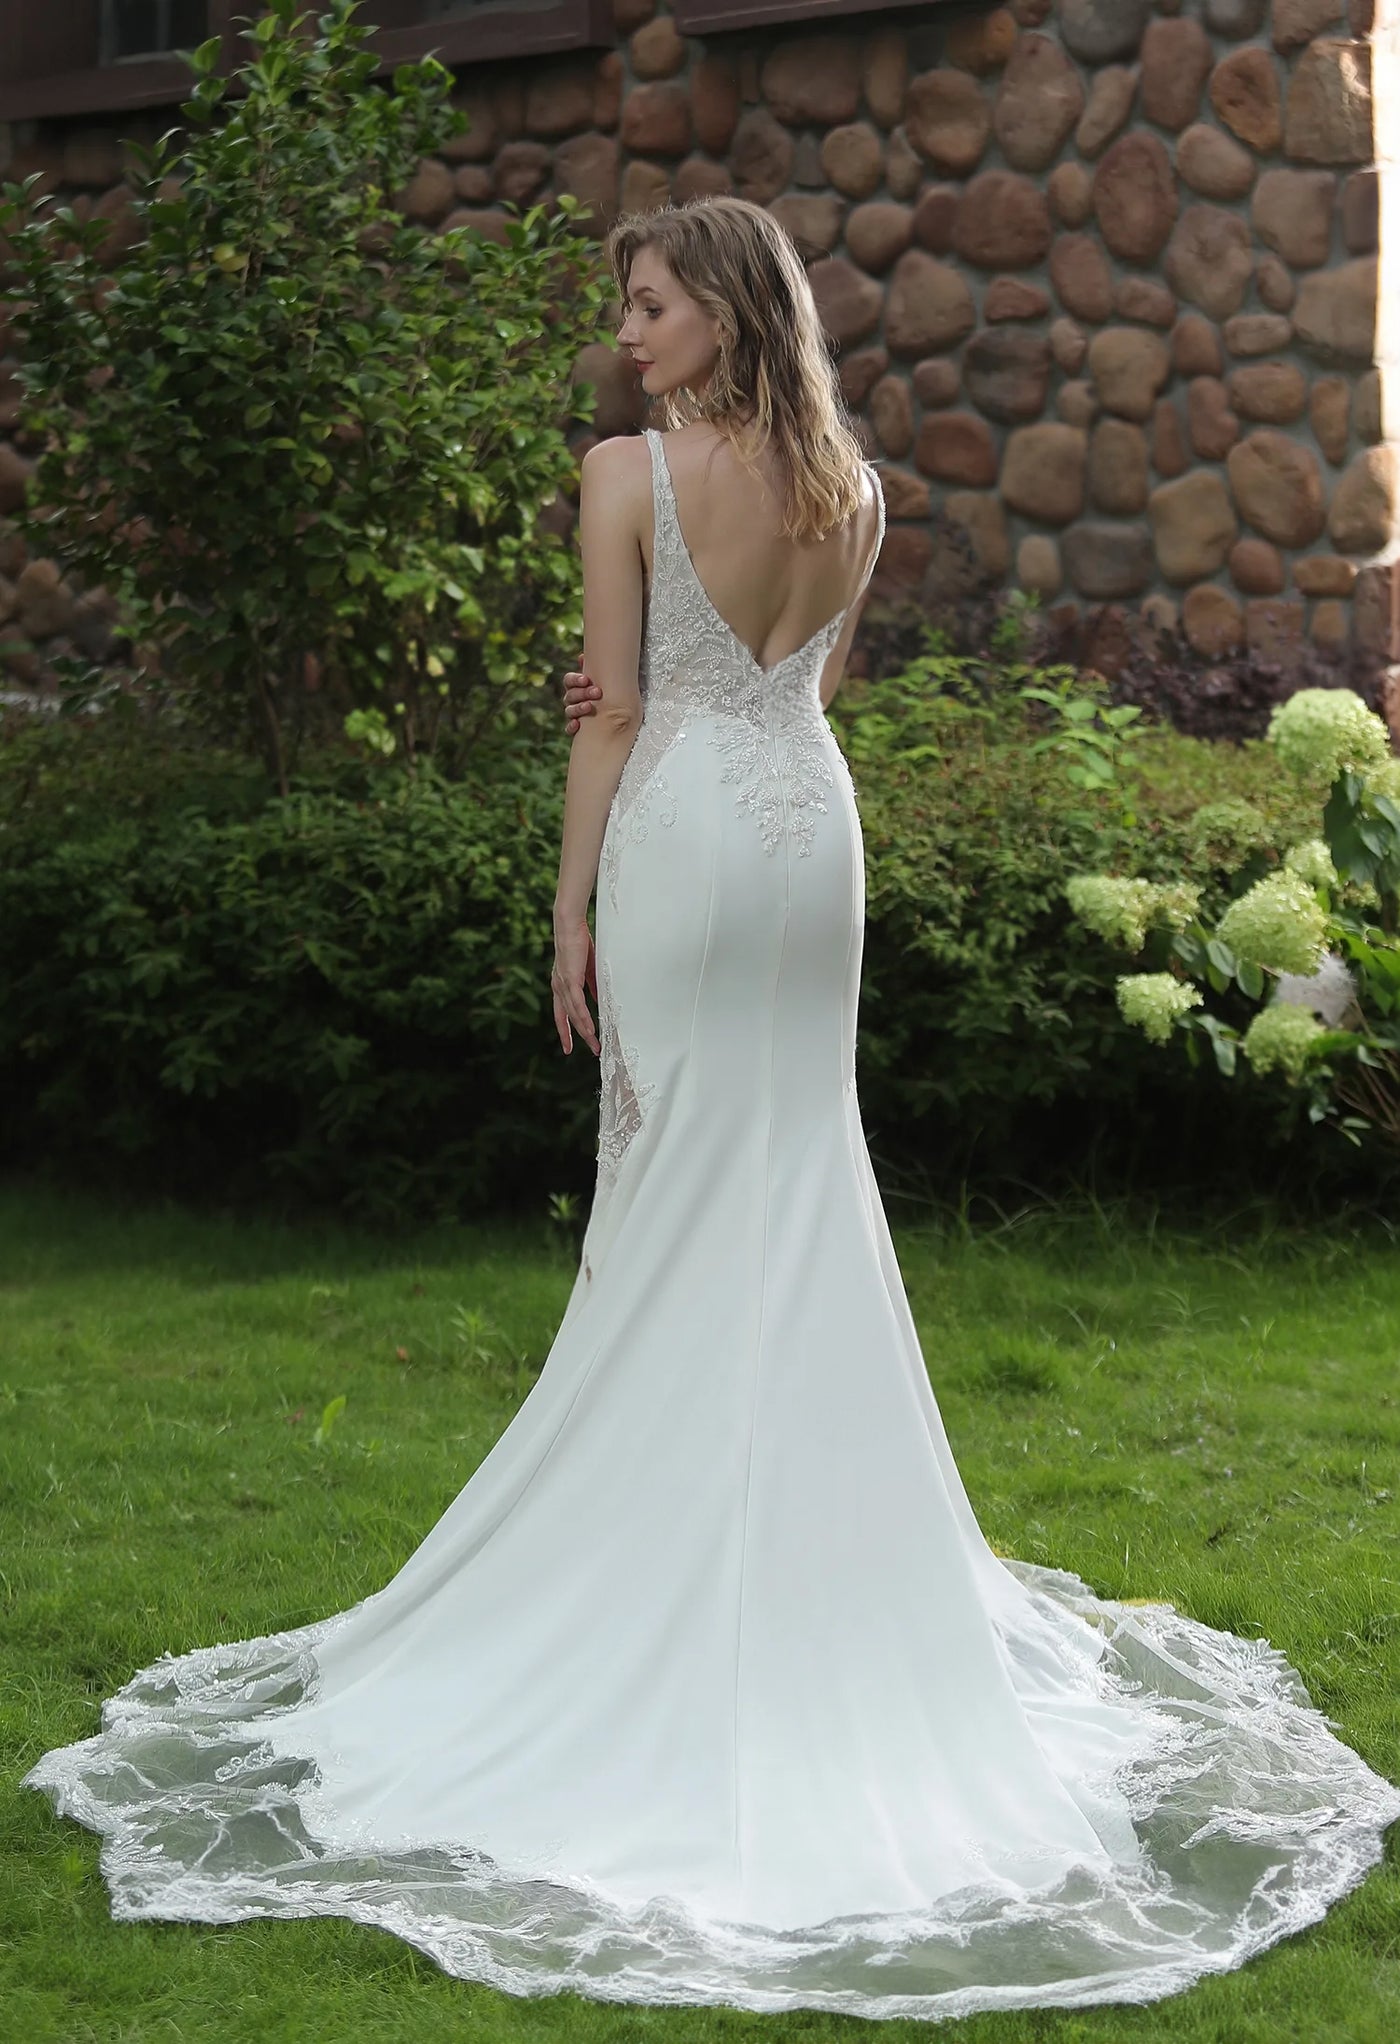 A woman standing on grass and facing away from the camera, wearing a Bergamot Bridal Simple Beaded Fit And Flare Gown with V Neckline And Crepe Skirt with an open back.